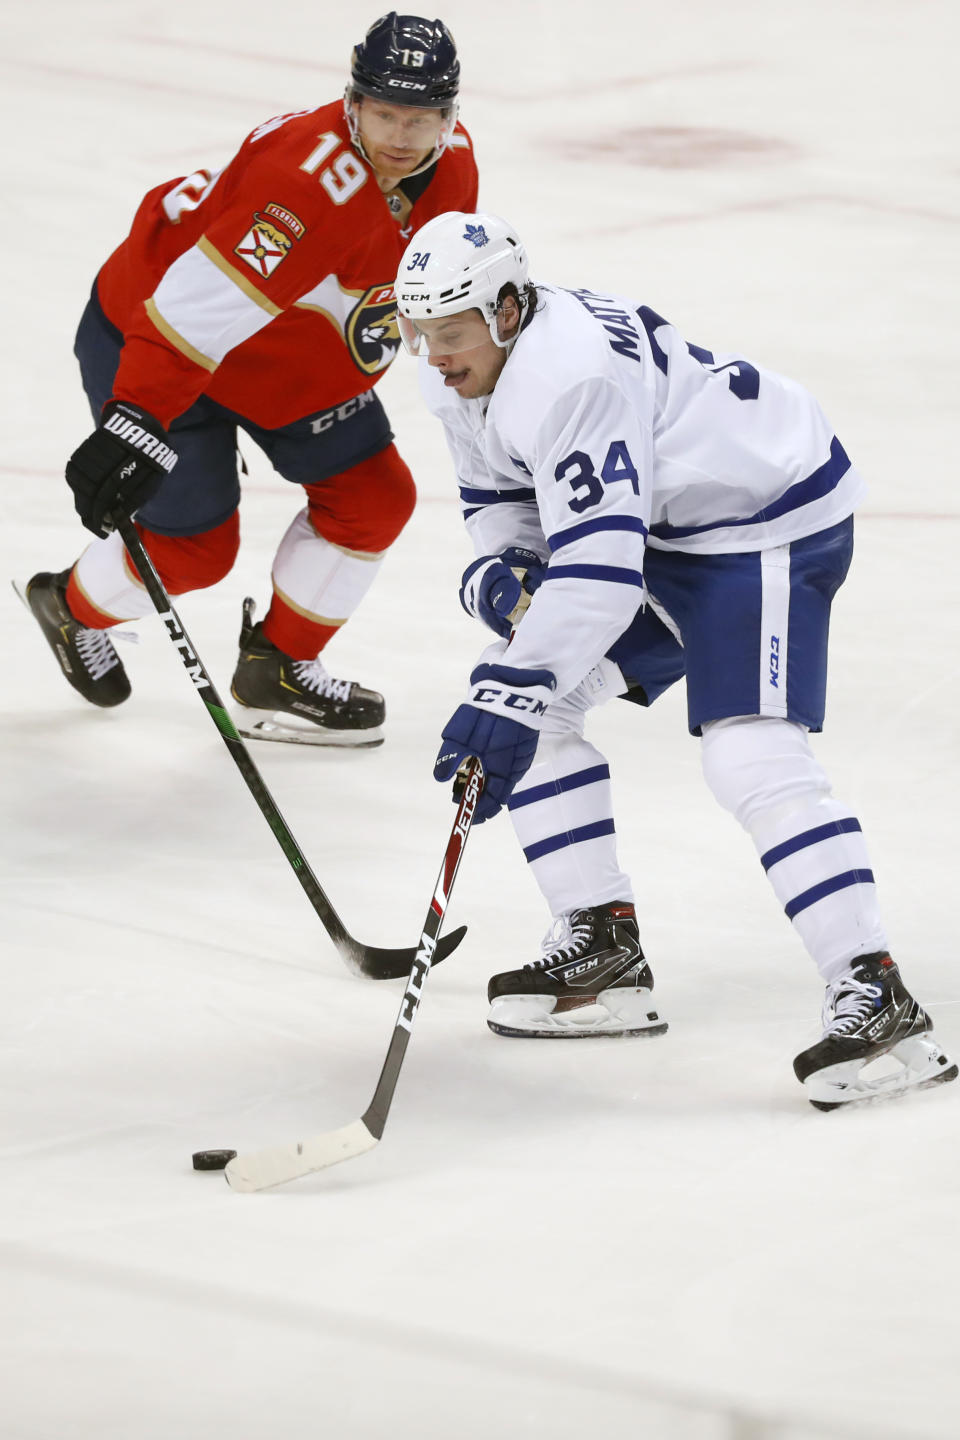 Toronto Maple Leafs center Auston Matthews (34) and Florida Panthers defenseman Mike Matheson (19) battle for the puck during the second period of an NHL hockey game, Sunday, Jan. 12, 2020, in Sunrise, Fla. (AP Photo/Wilfredo Lee)